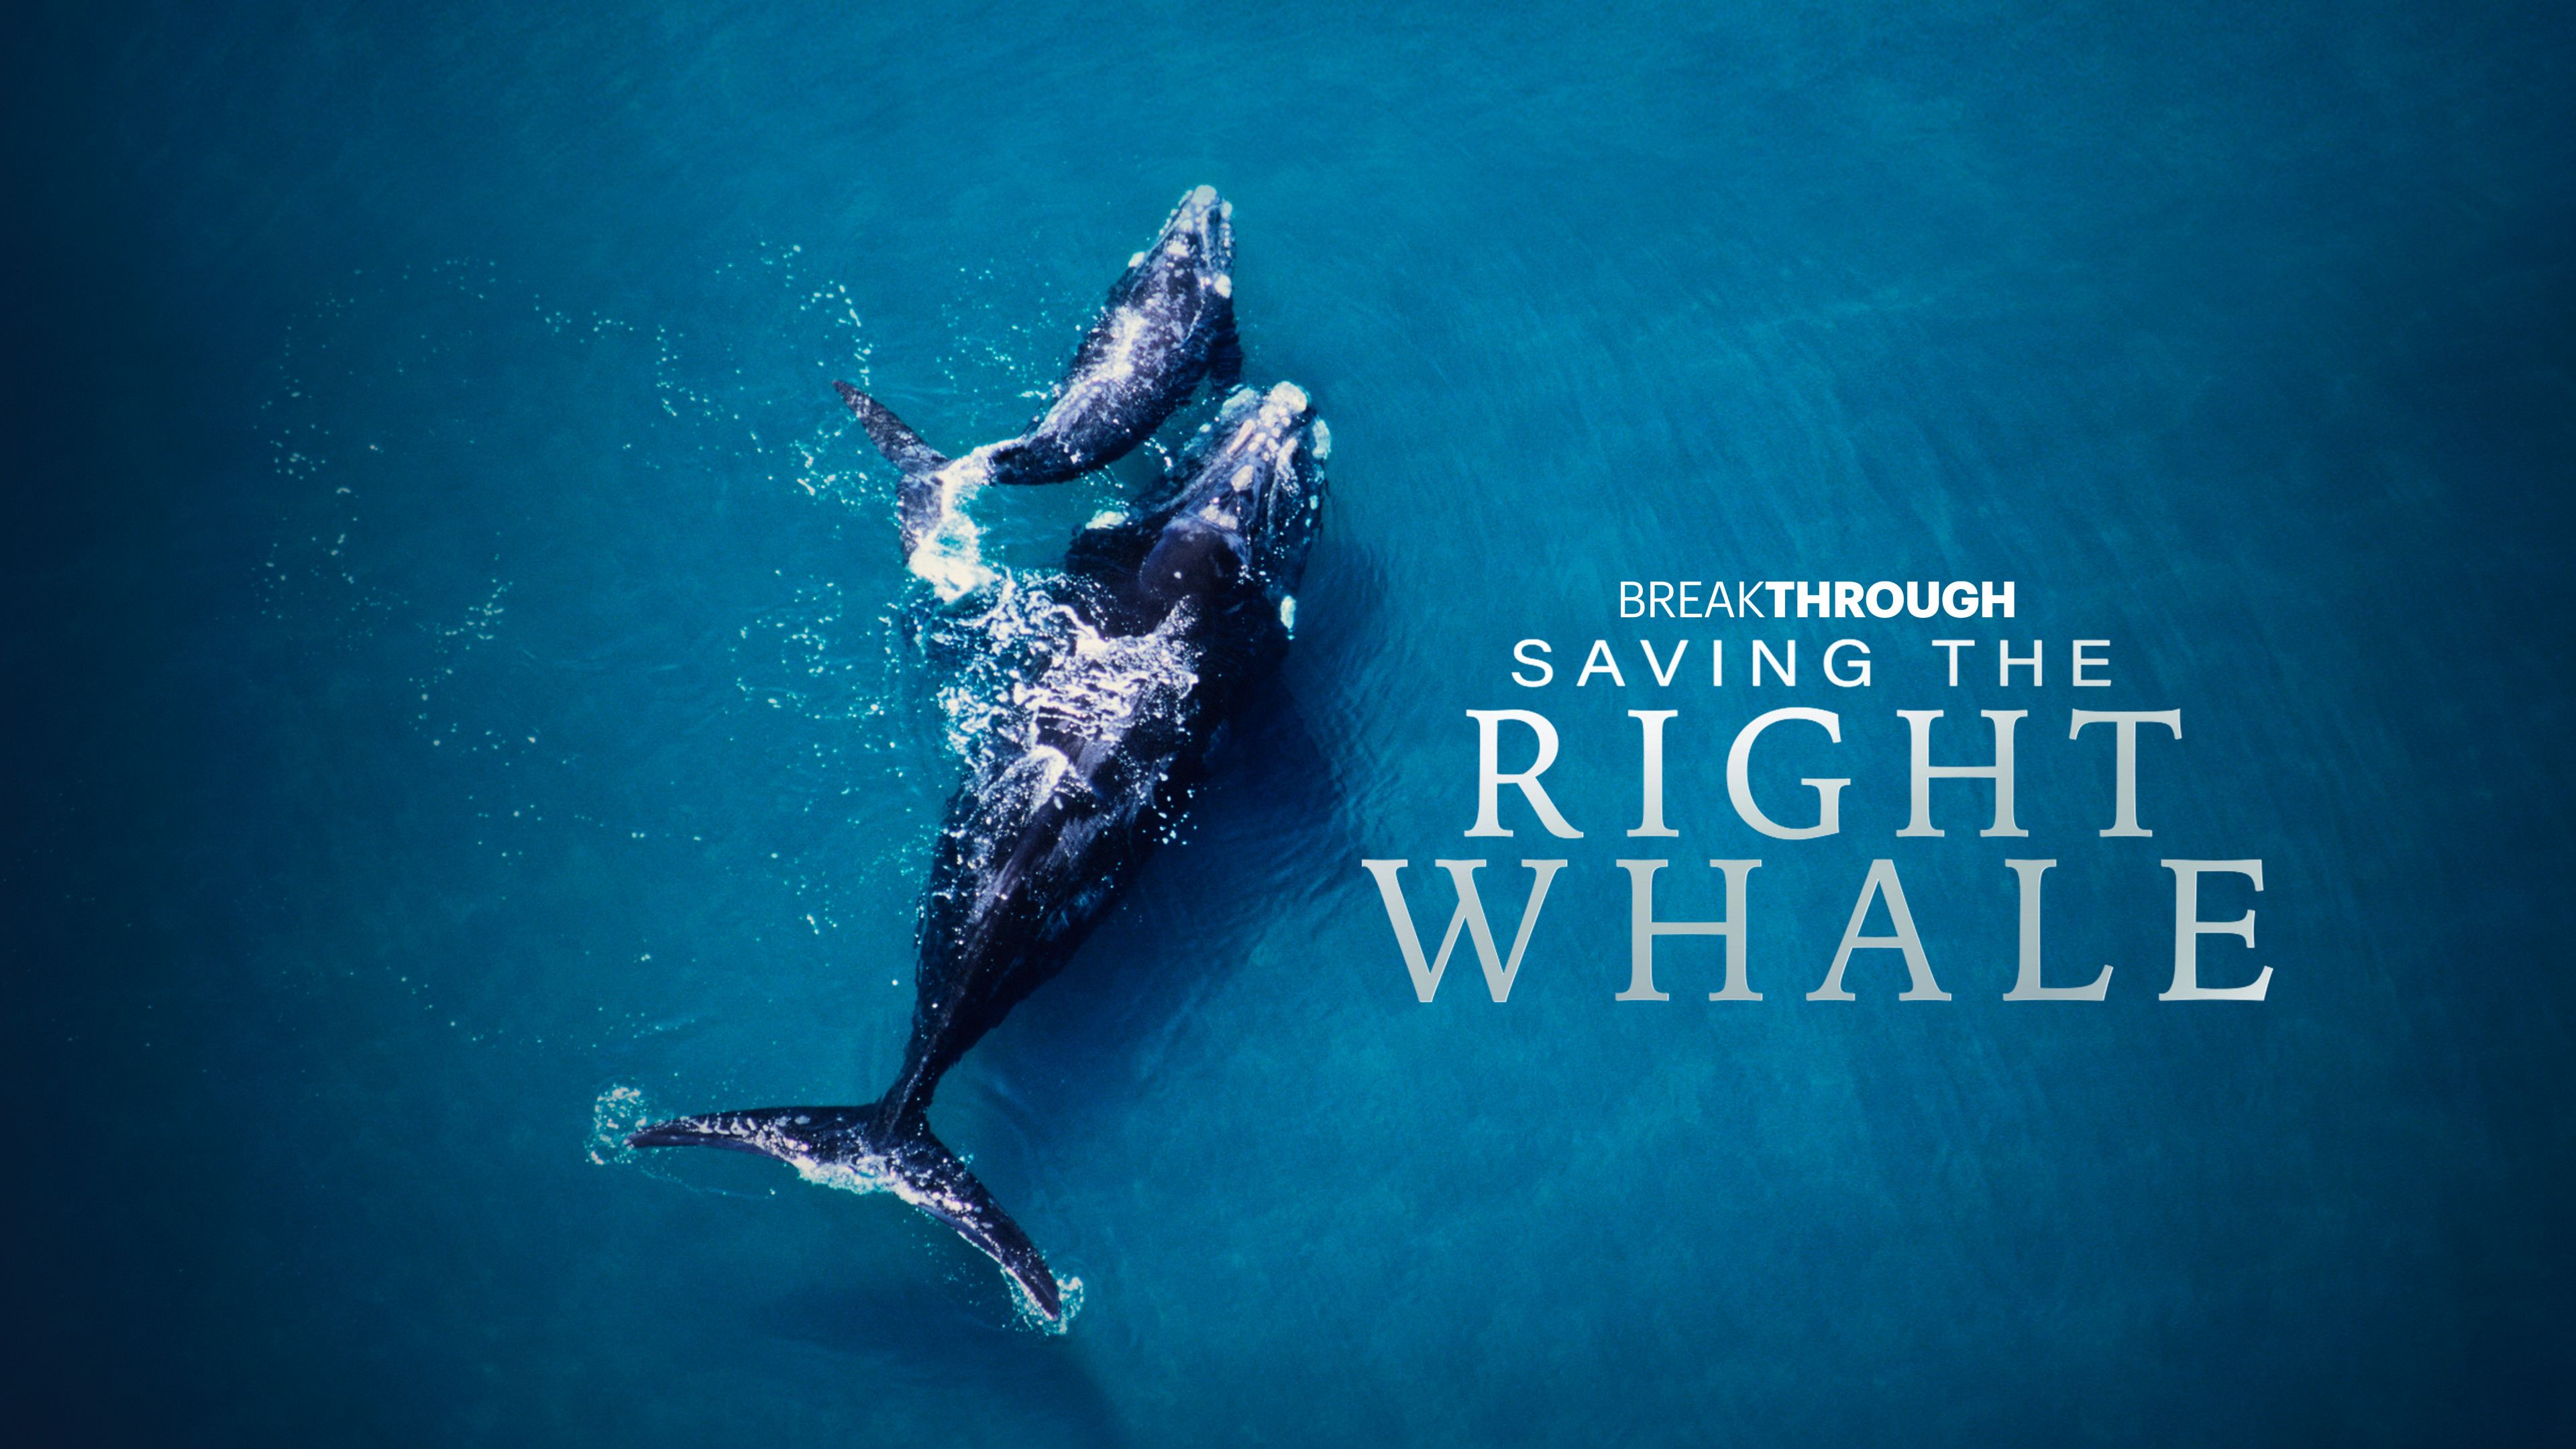 Saving the Right Whale